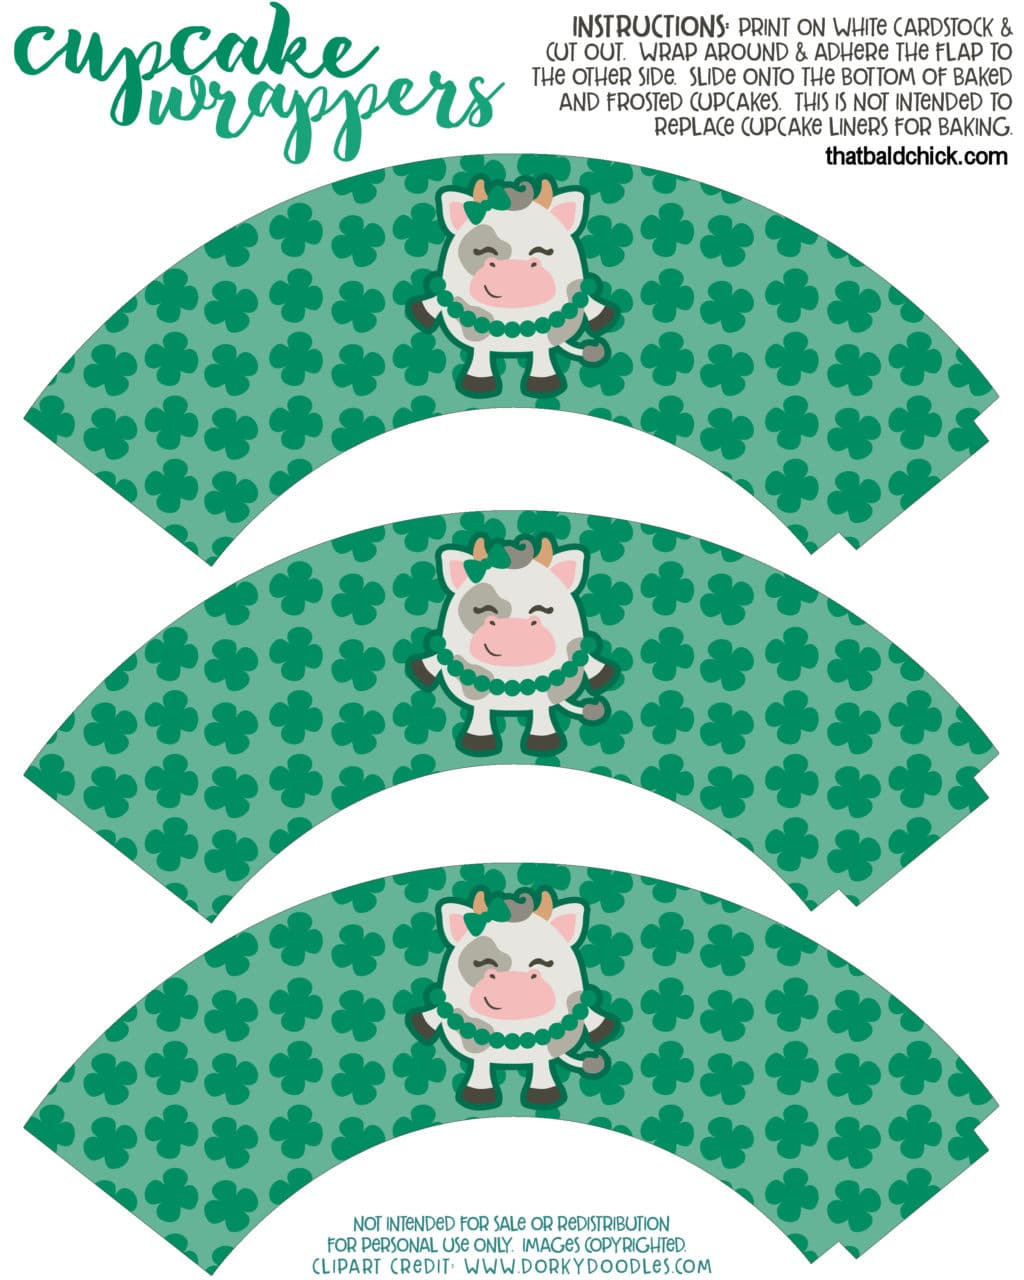 St Patrick's Day Cupcake Wrappers - free printable at thatbaldchick.com